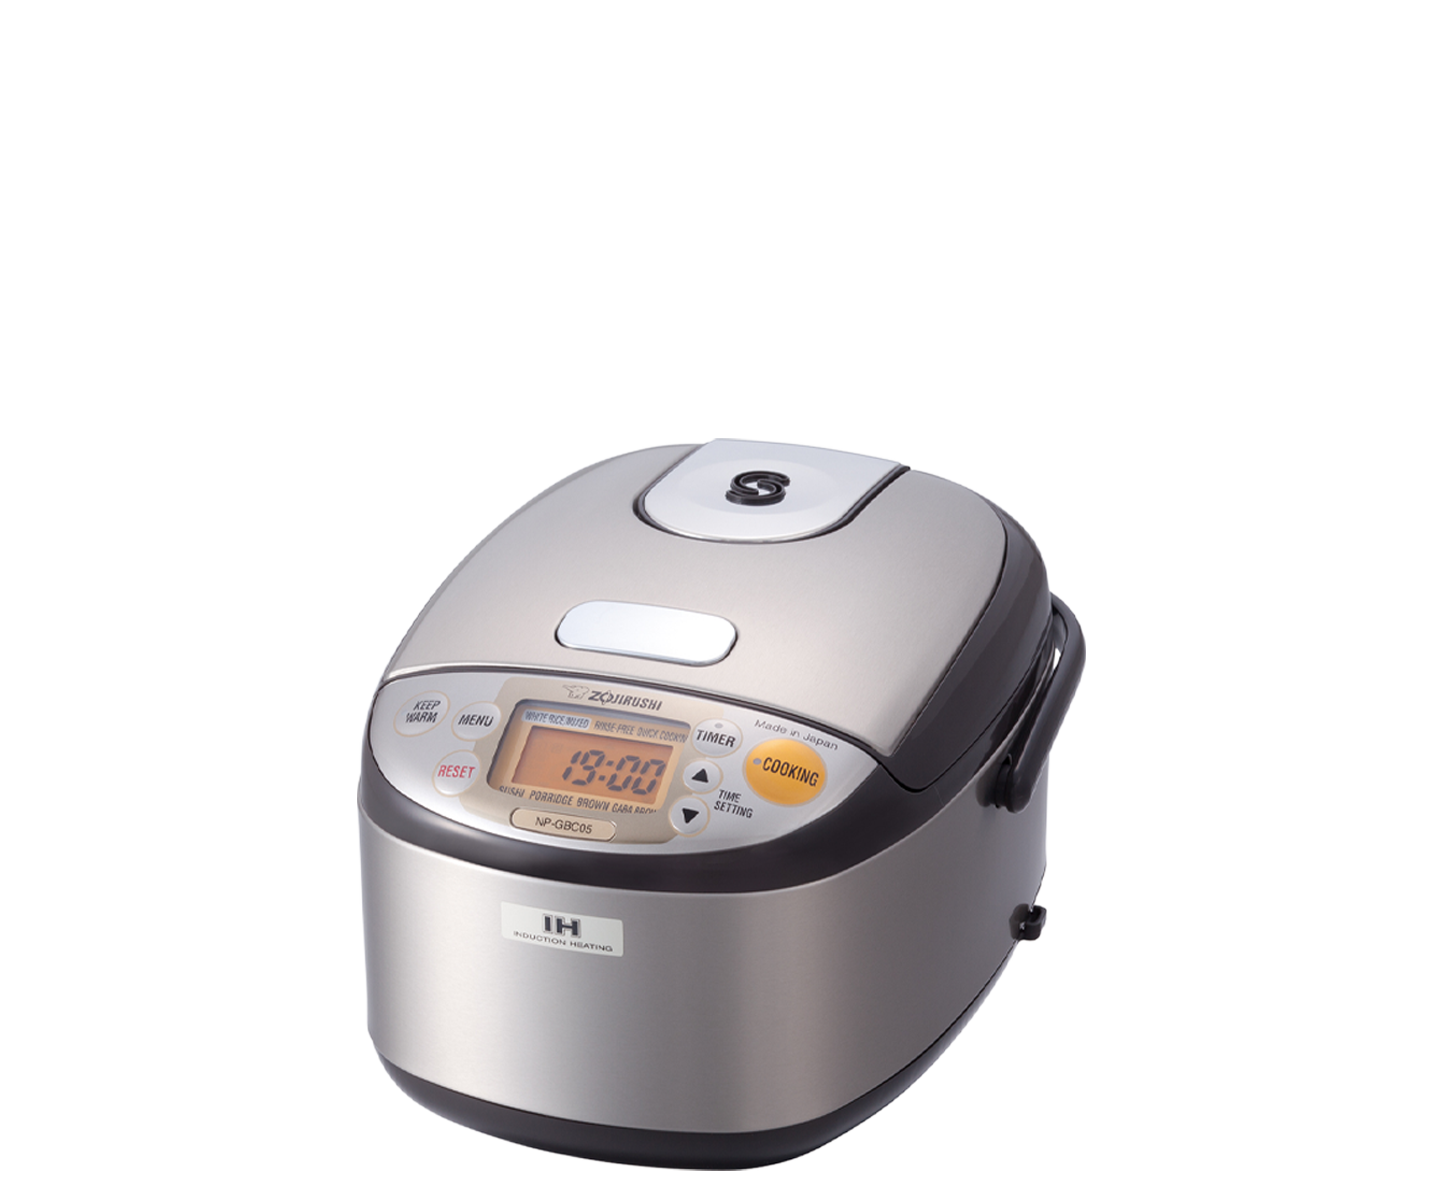 Zojirushi Induction Rice Cooker Review: Here's why we love it - Reviewed